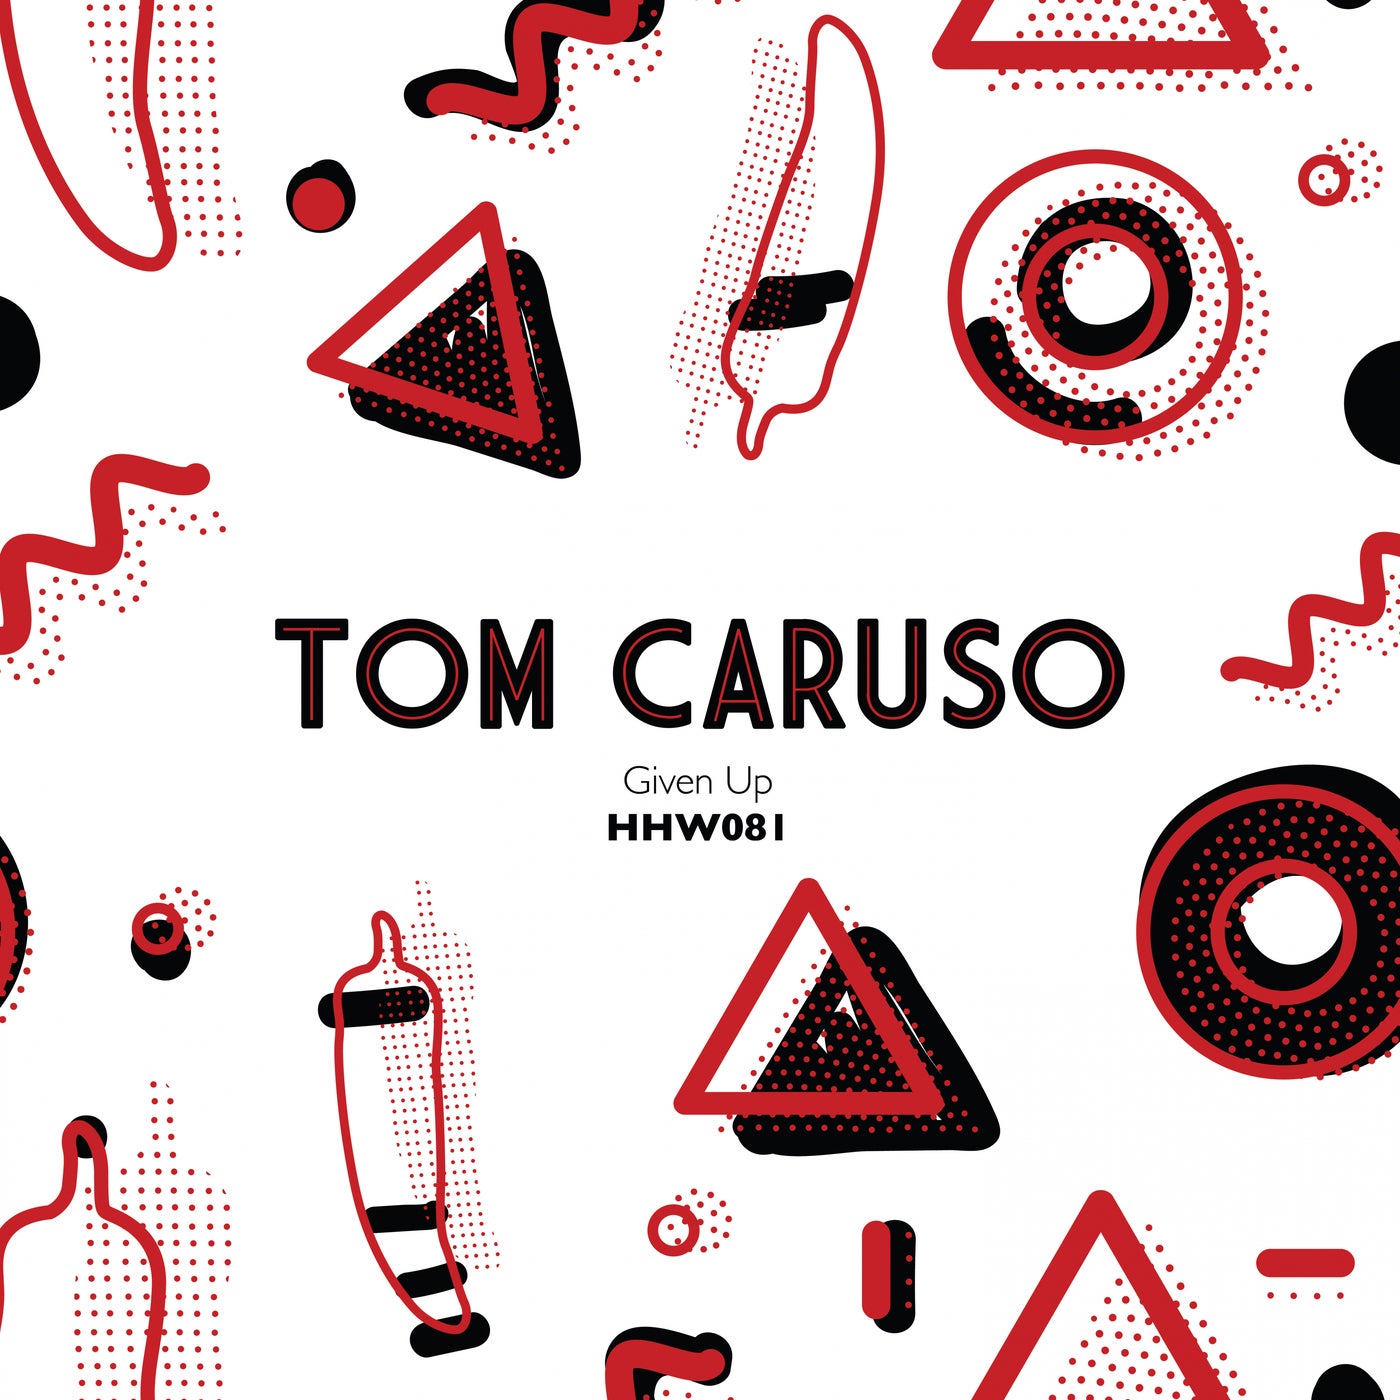 Tom Caruso – Given Up [HHW081]